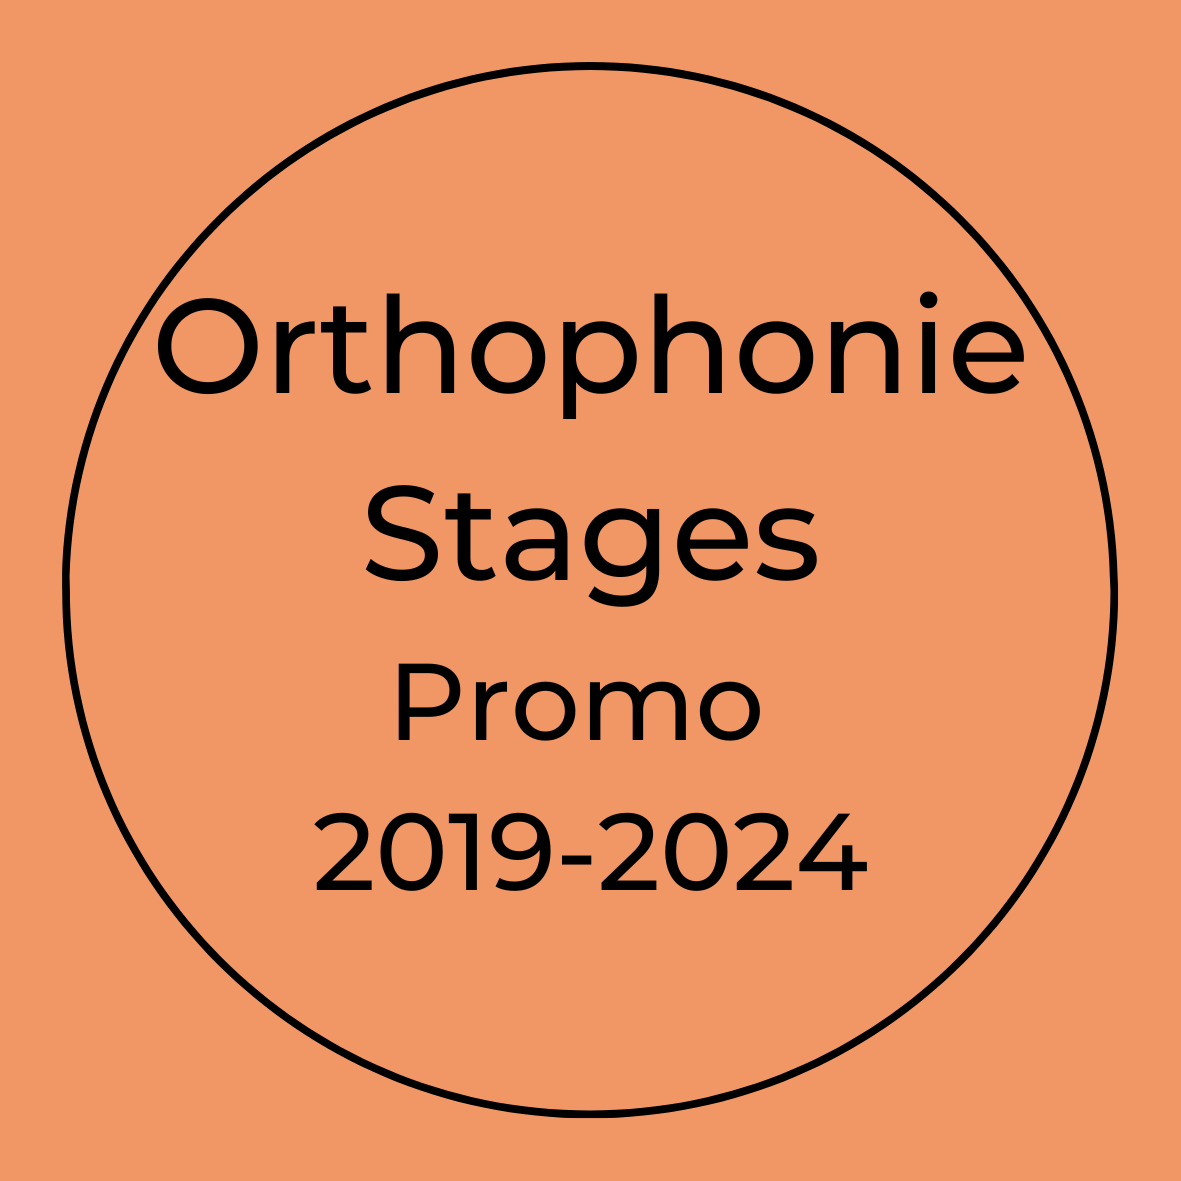 Orthophonie Stages Promo 2019-2024